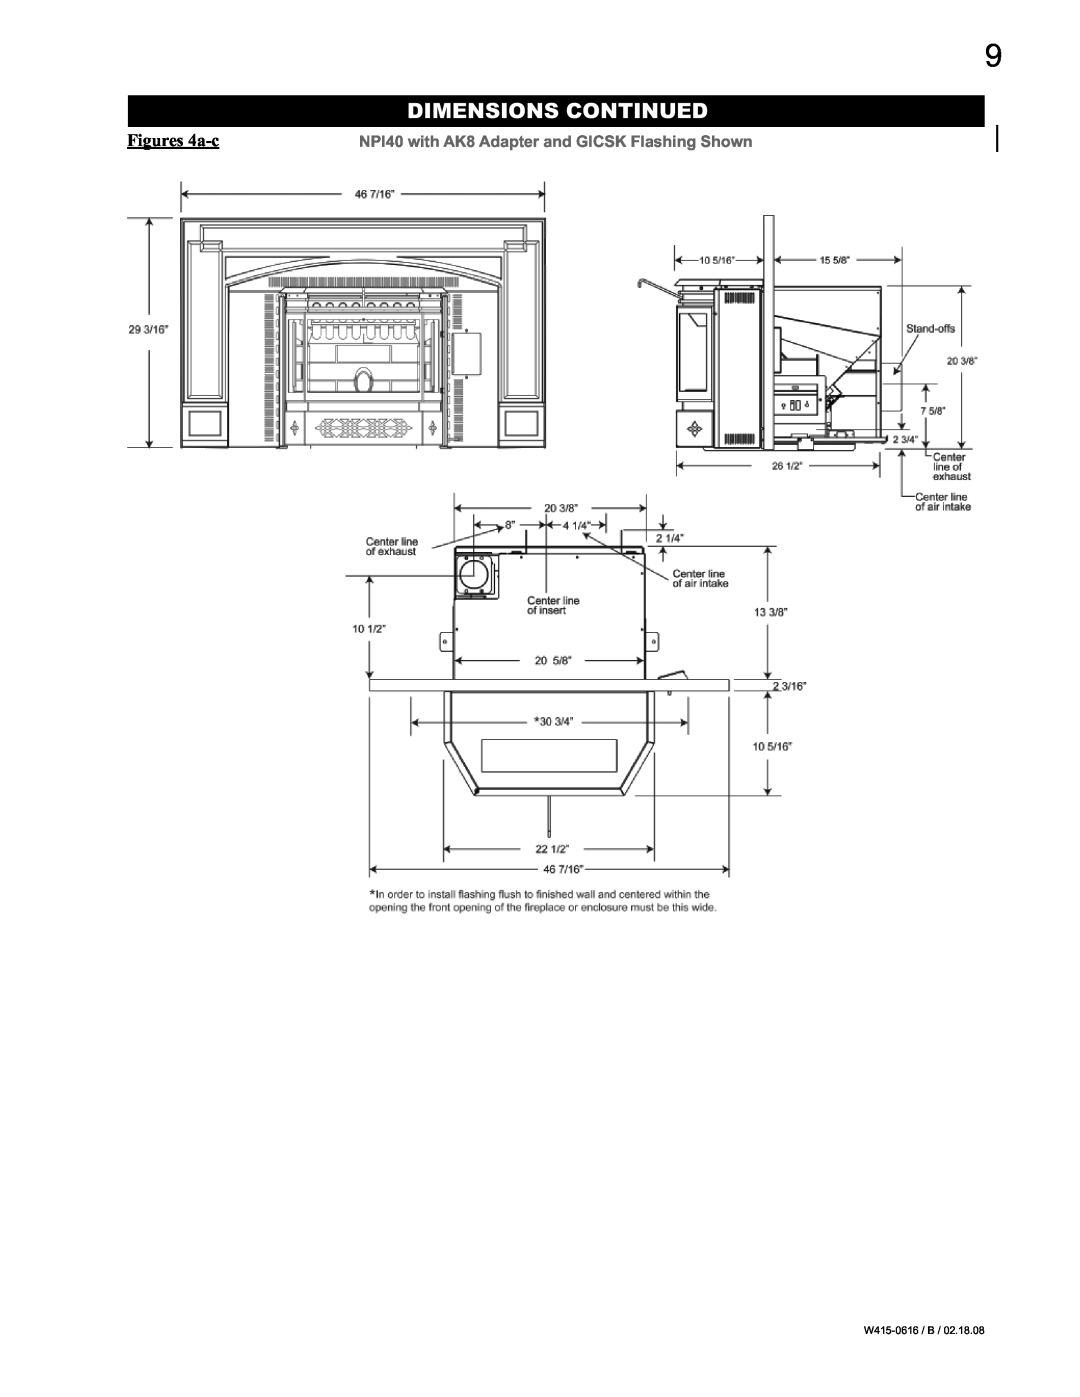 Napoleon Fireplaces NPS40 manual Dimensions Continued, Figures 4a-c, NPI40 with AK8 Adapter and GICSK Flashing Shown 